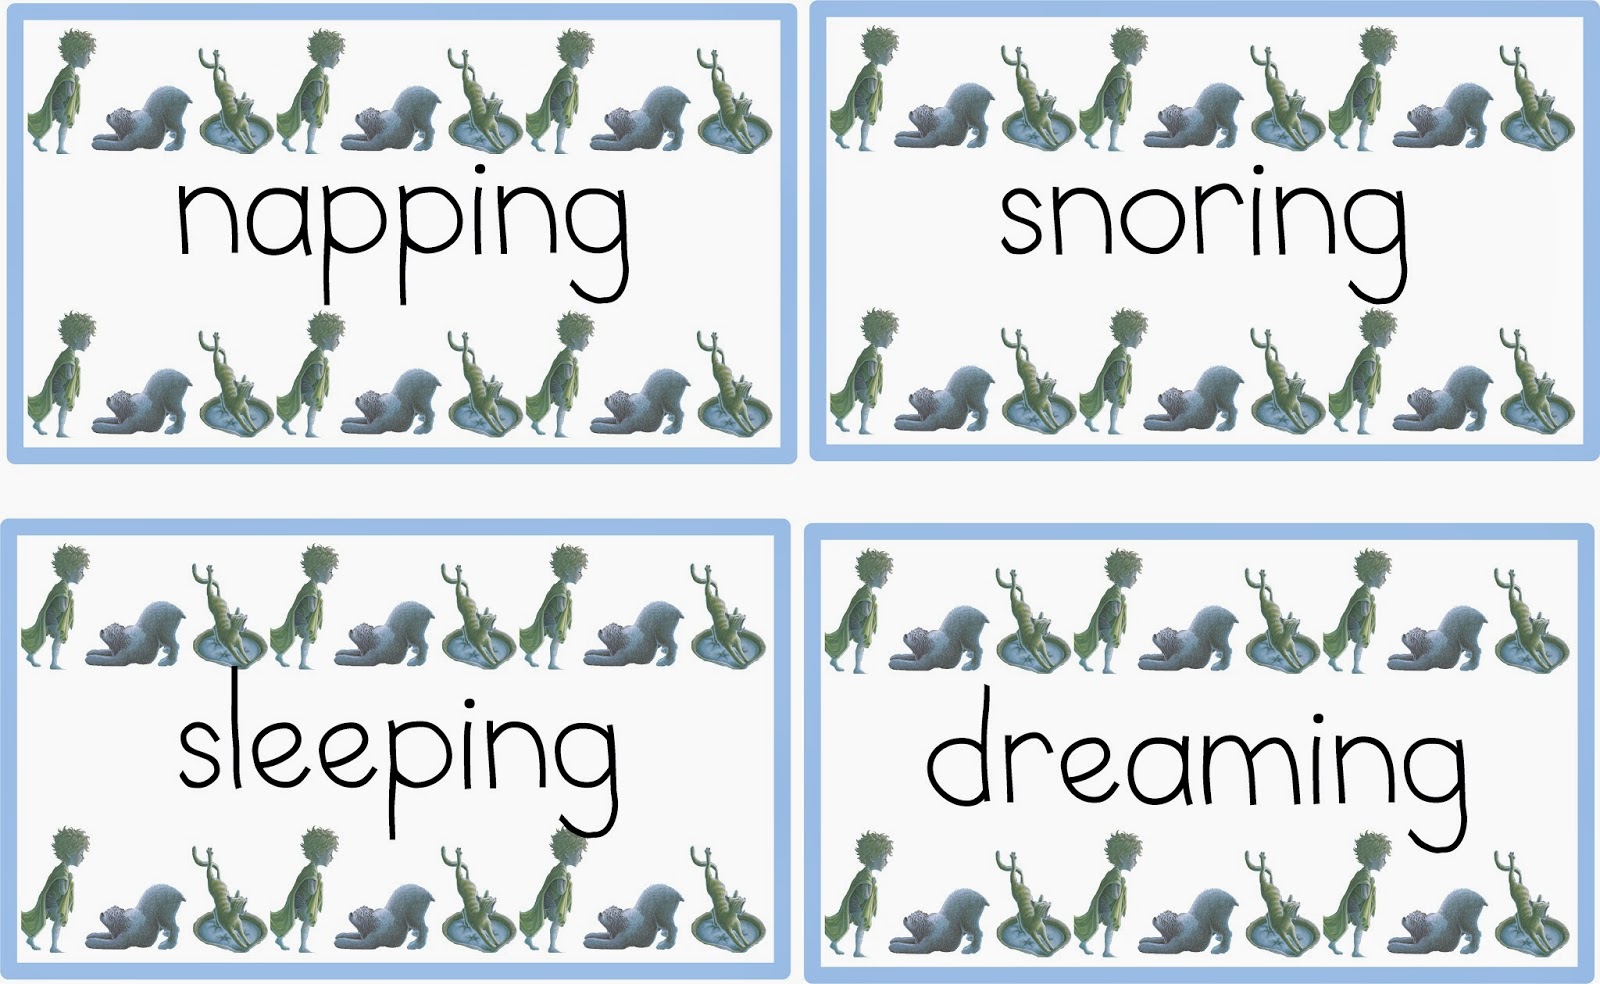 napping house clipart - photo #5